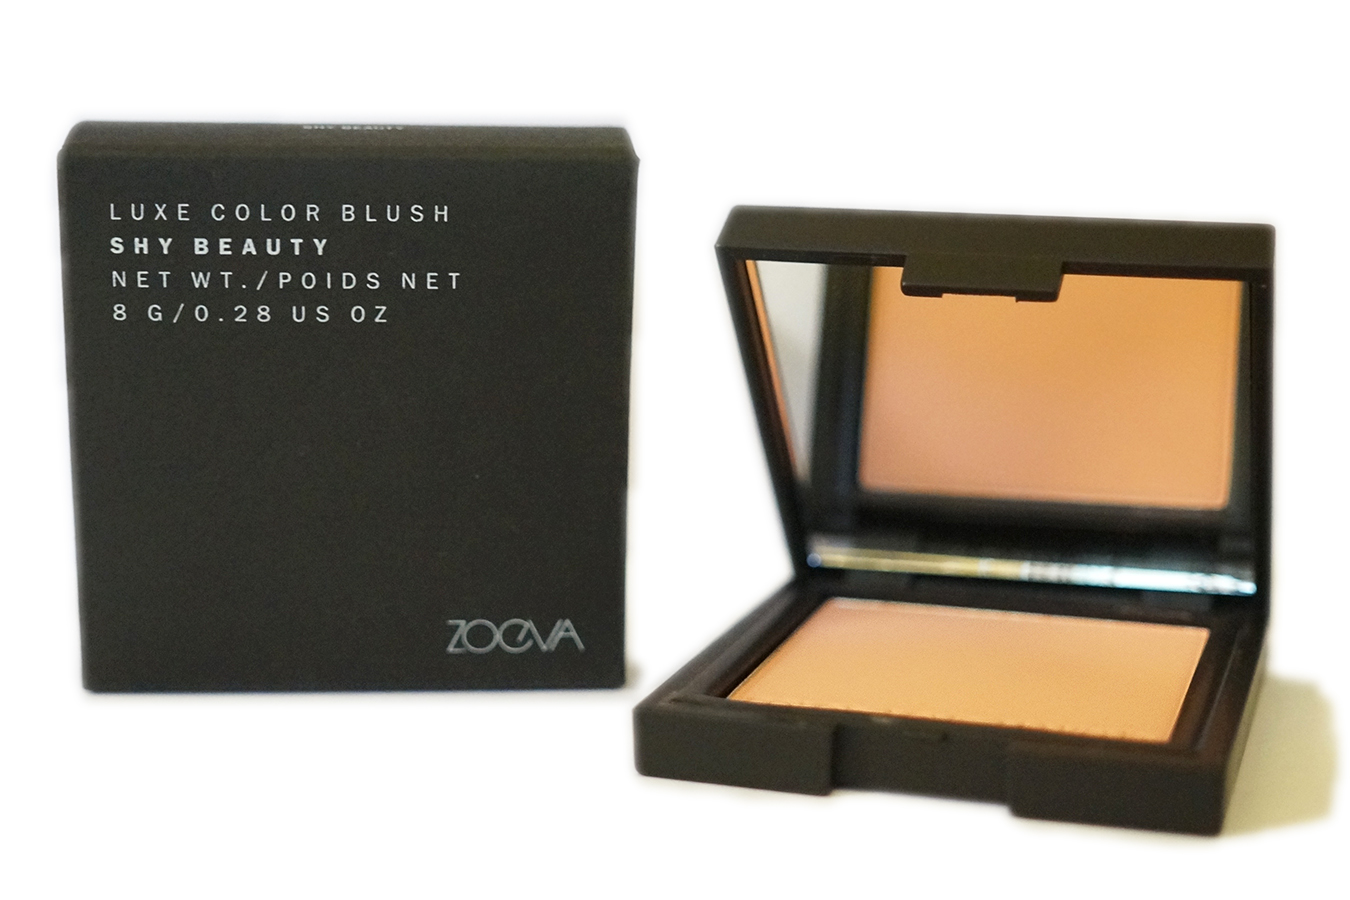 ZOEVA Luxe Color Blush in Shy Beauty